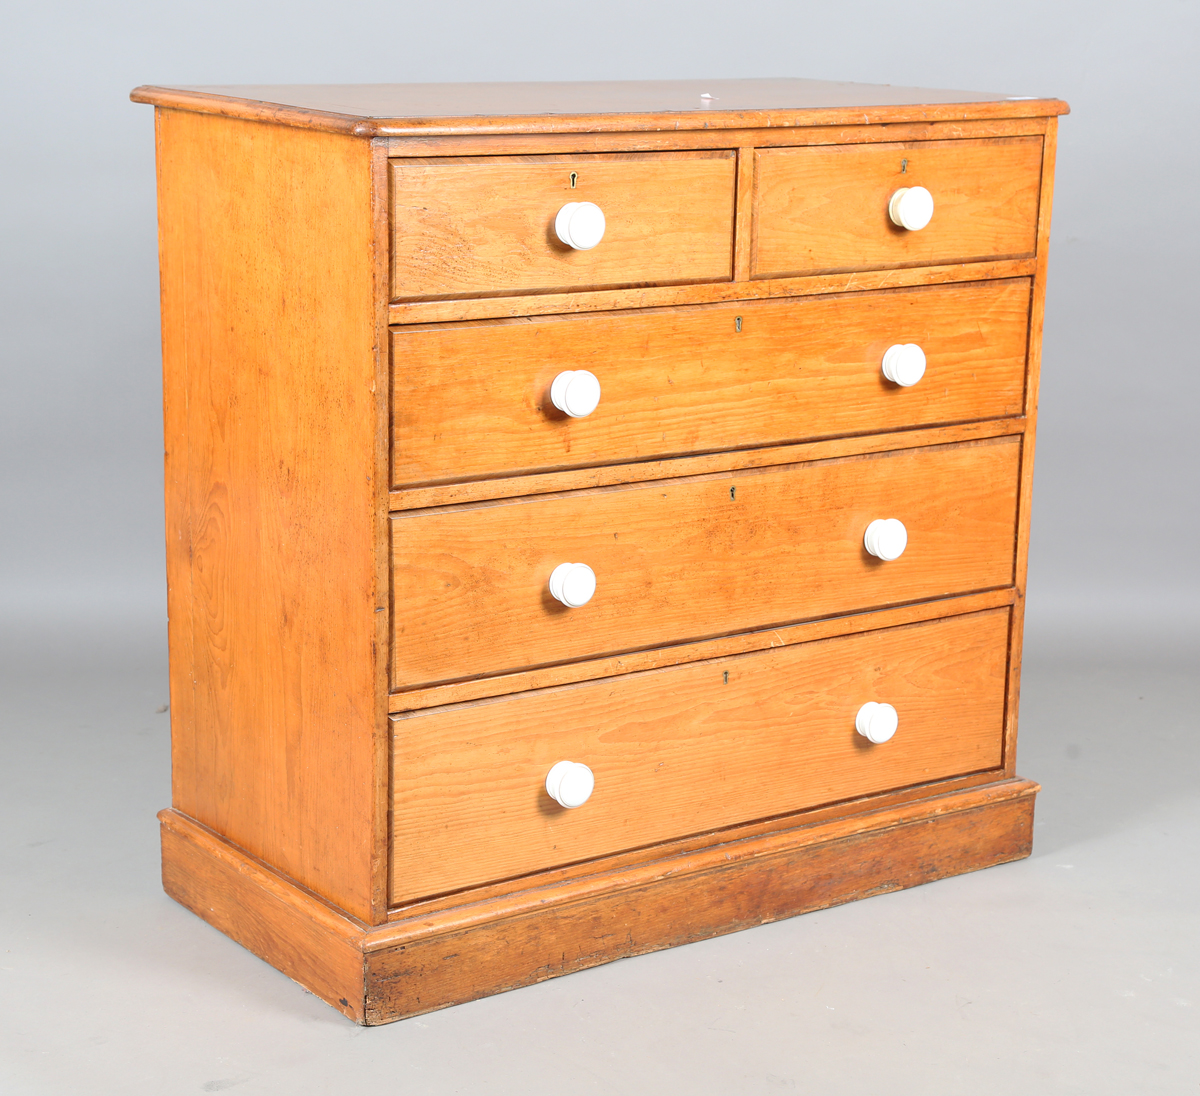 A mid-Victorian pine chest of drawers, the top with kingwood crossbanding, the drawers with later